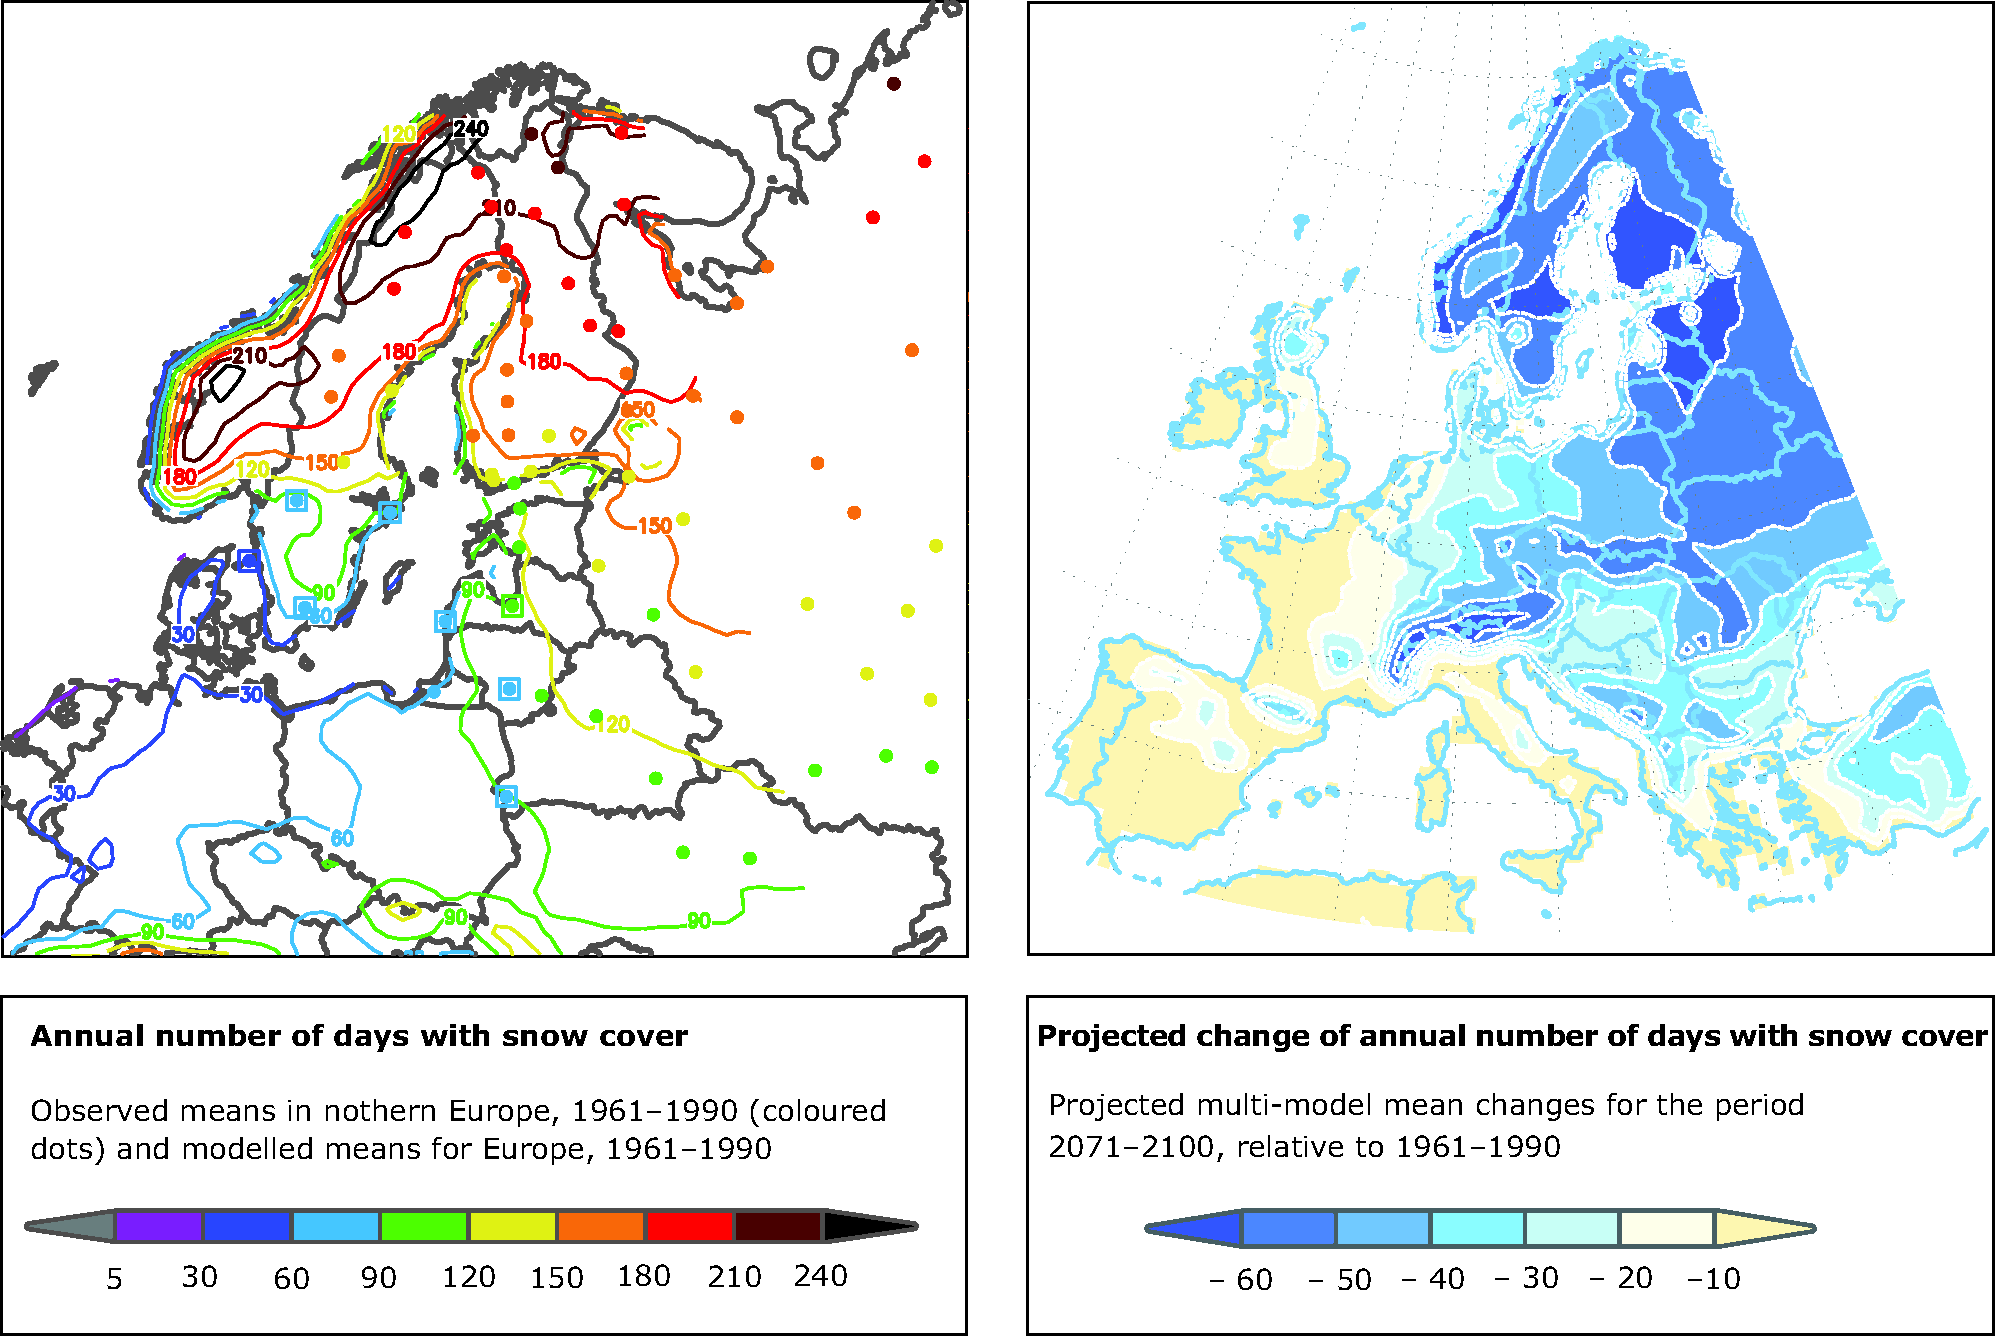 Annual number of days with snow cover over European land areas 1961-1990 and projected change for 2071-2100